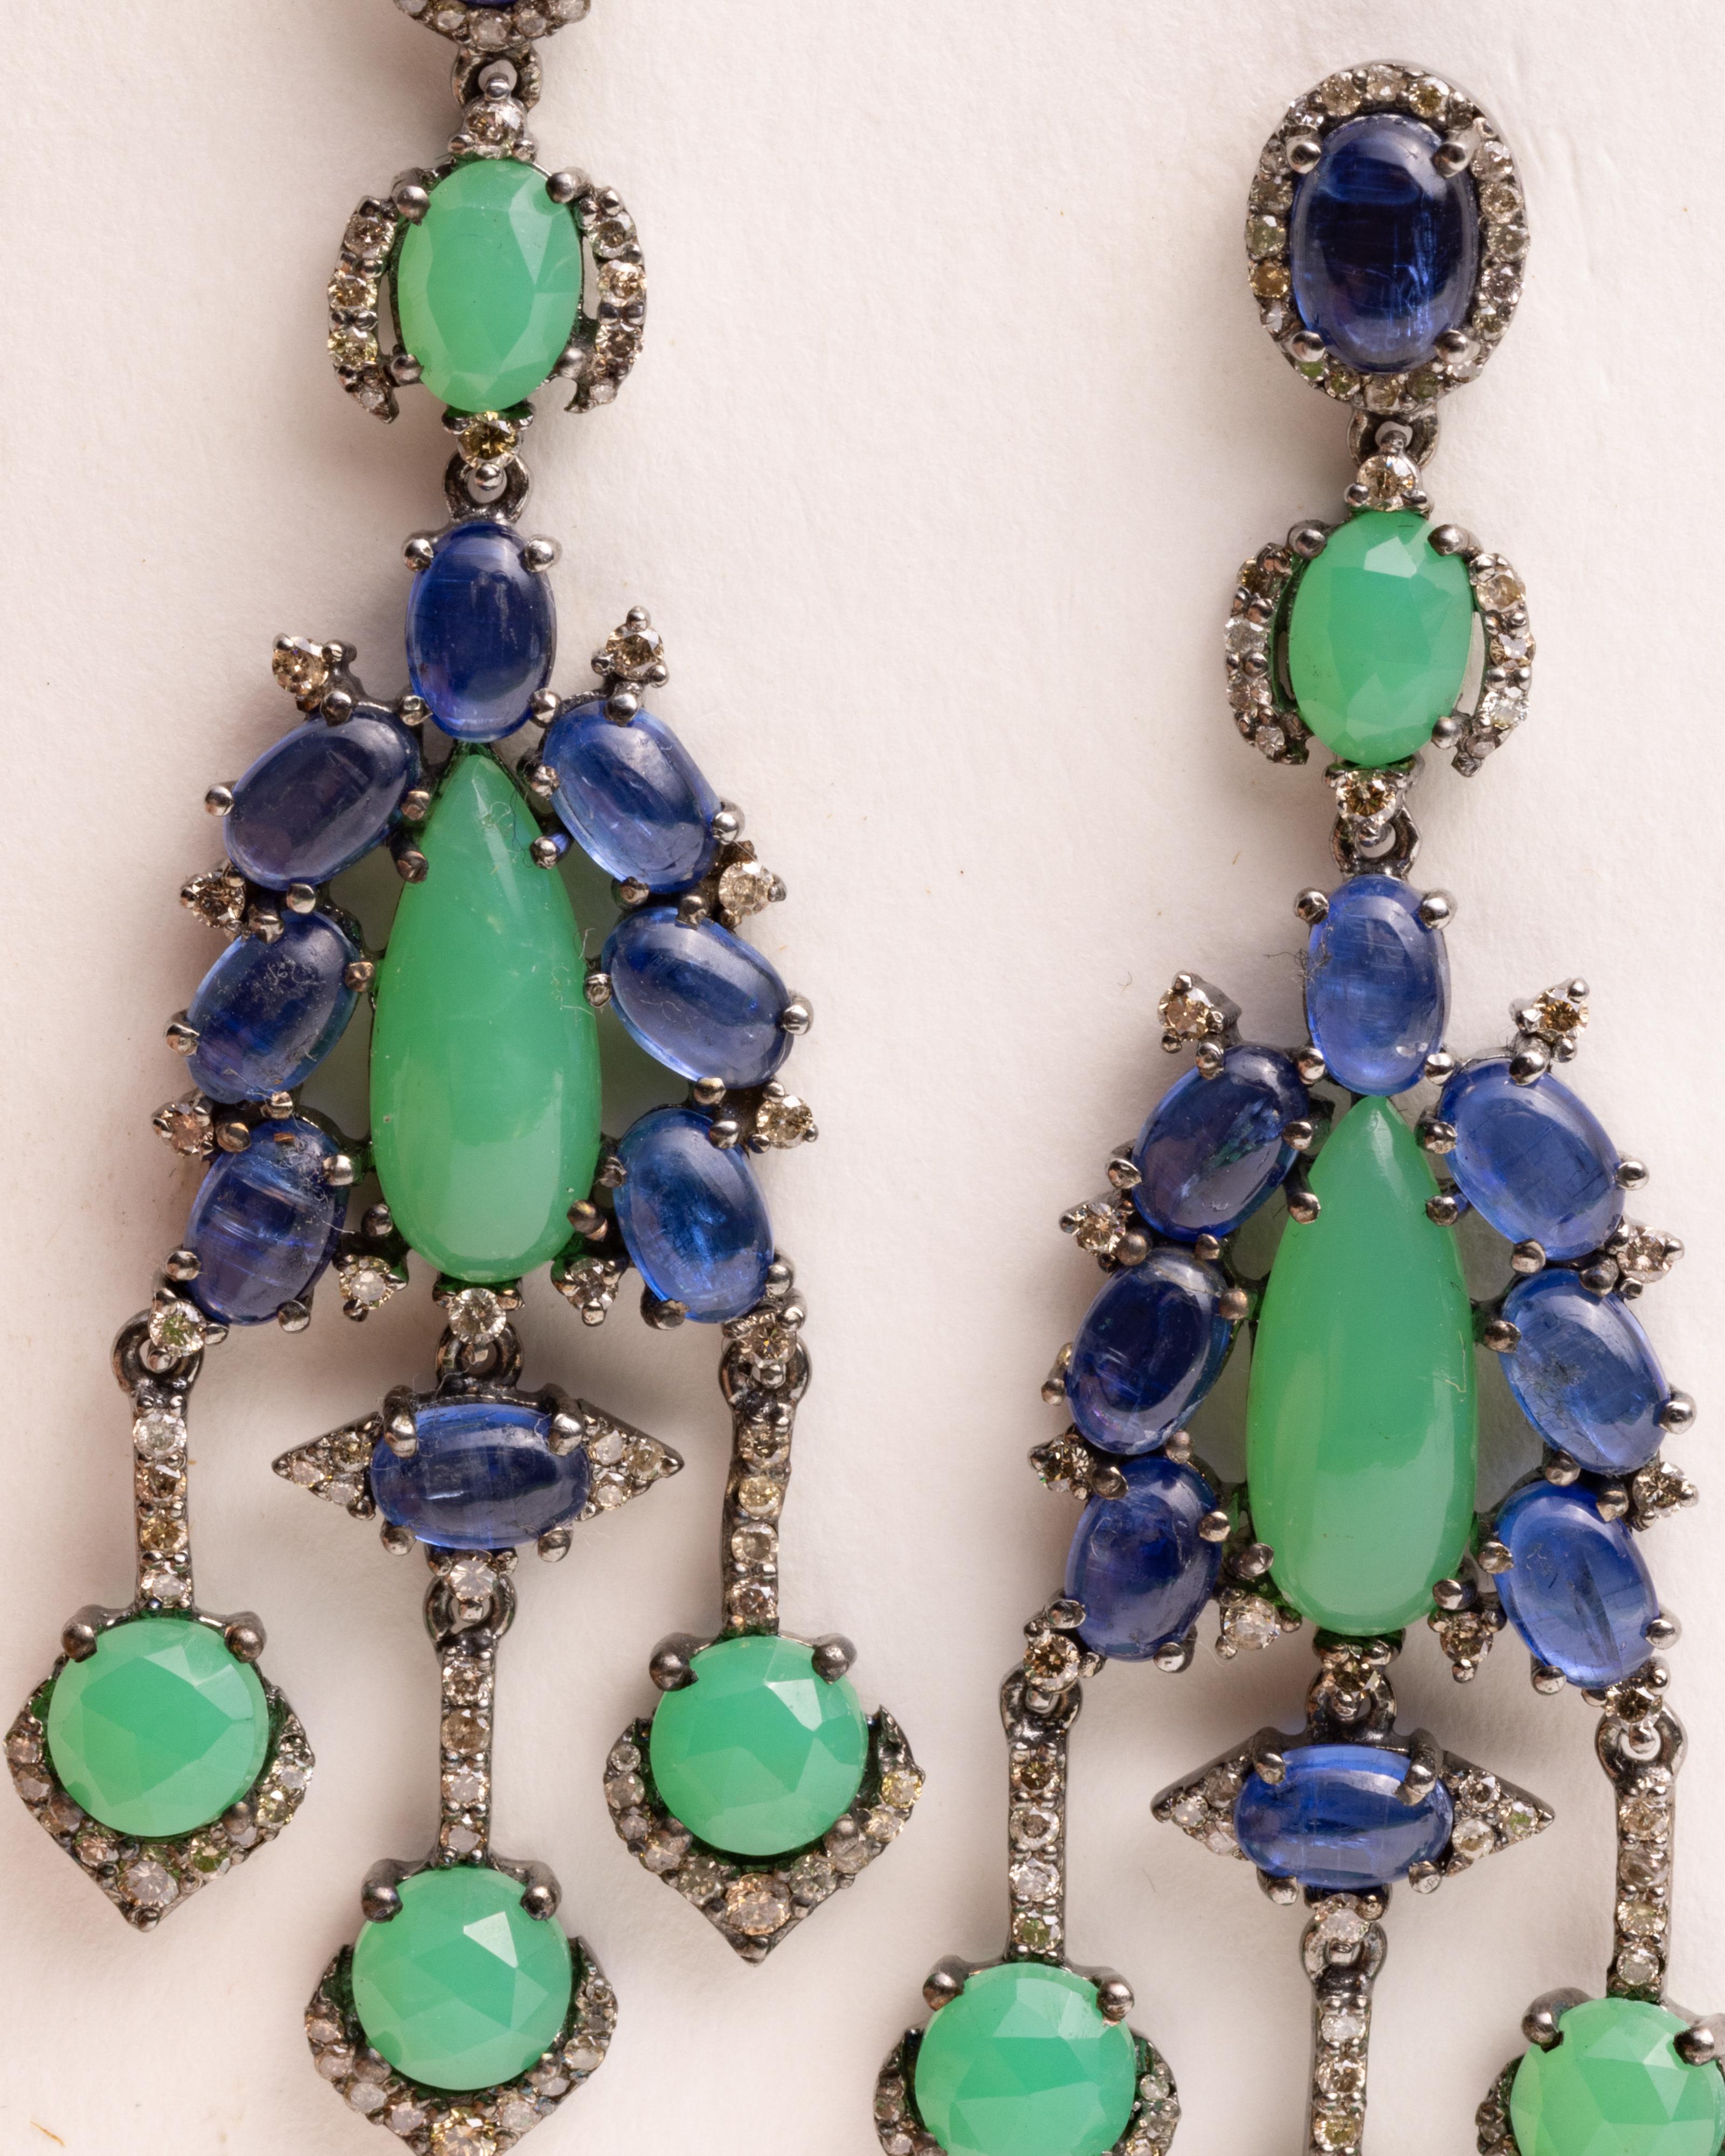 A long dramatic pair of chandelier earrings with oval, faceted kyanite gem stones, and round, faceted green chalcedony stones and a center tear drop chalcedony.  All are interspersed with round, brilliant cut diamonds.  Set in an oxidized sterling